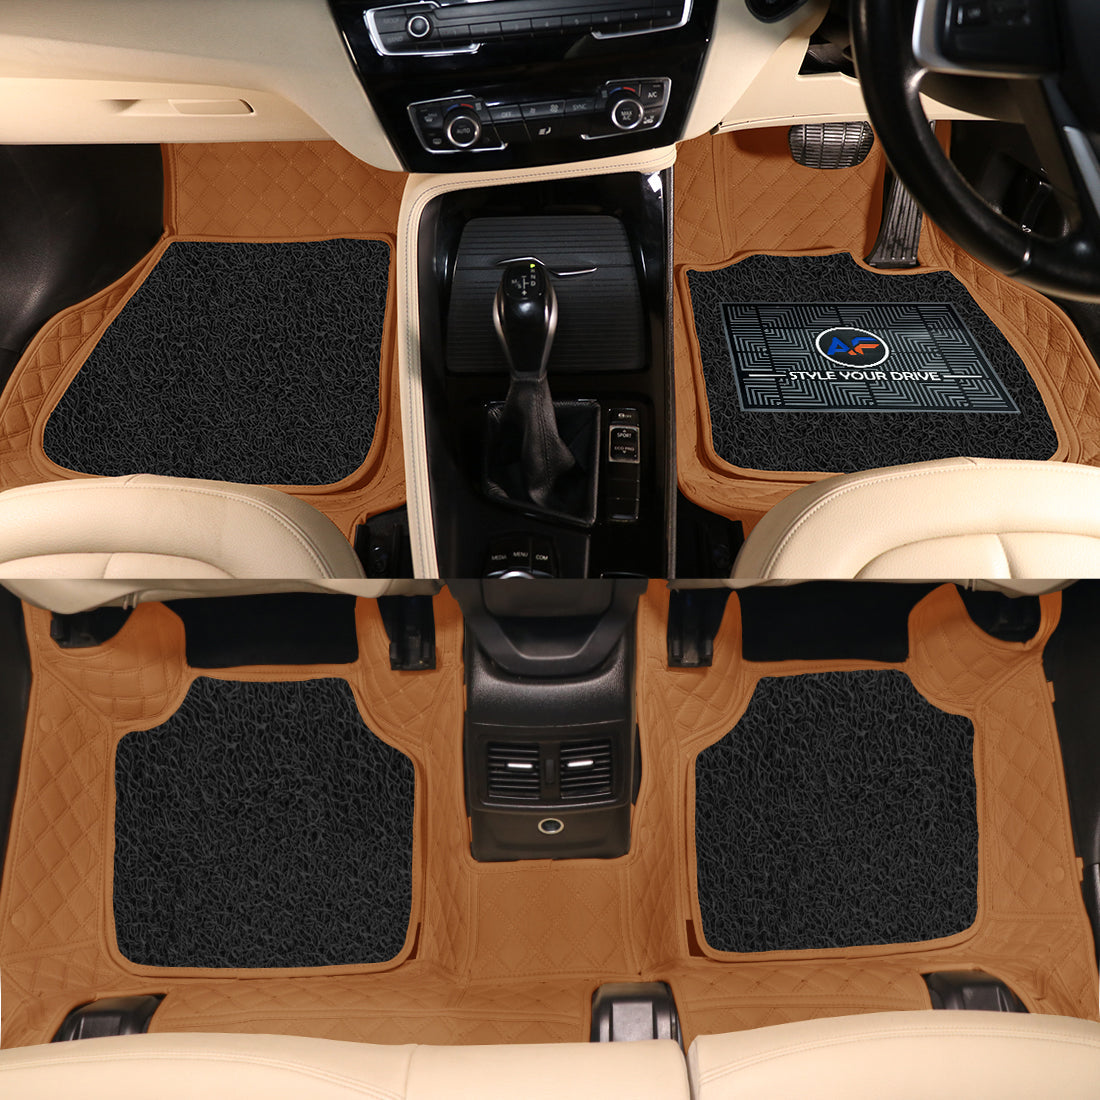 Mini Cooper S Convertible 2020 7D Luxury Car Mat, All Weather Proof, Anti-Skid, 100% Waterproof & Odorless with Unique Diamond Fish Design (24mm Luxury PU Leather, 2 Rows)